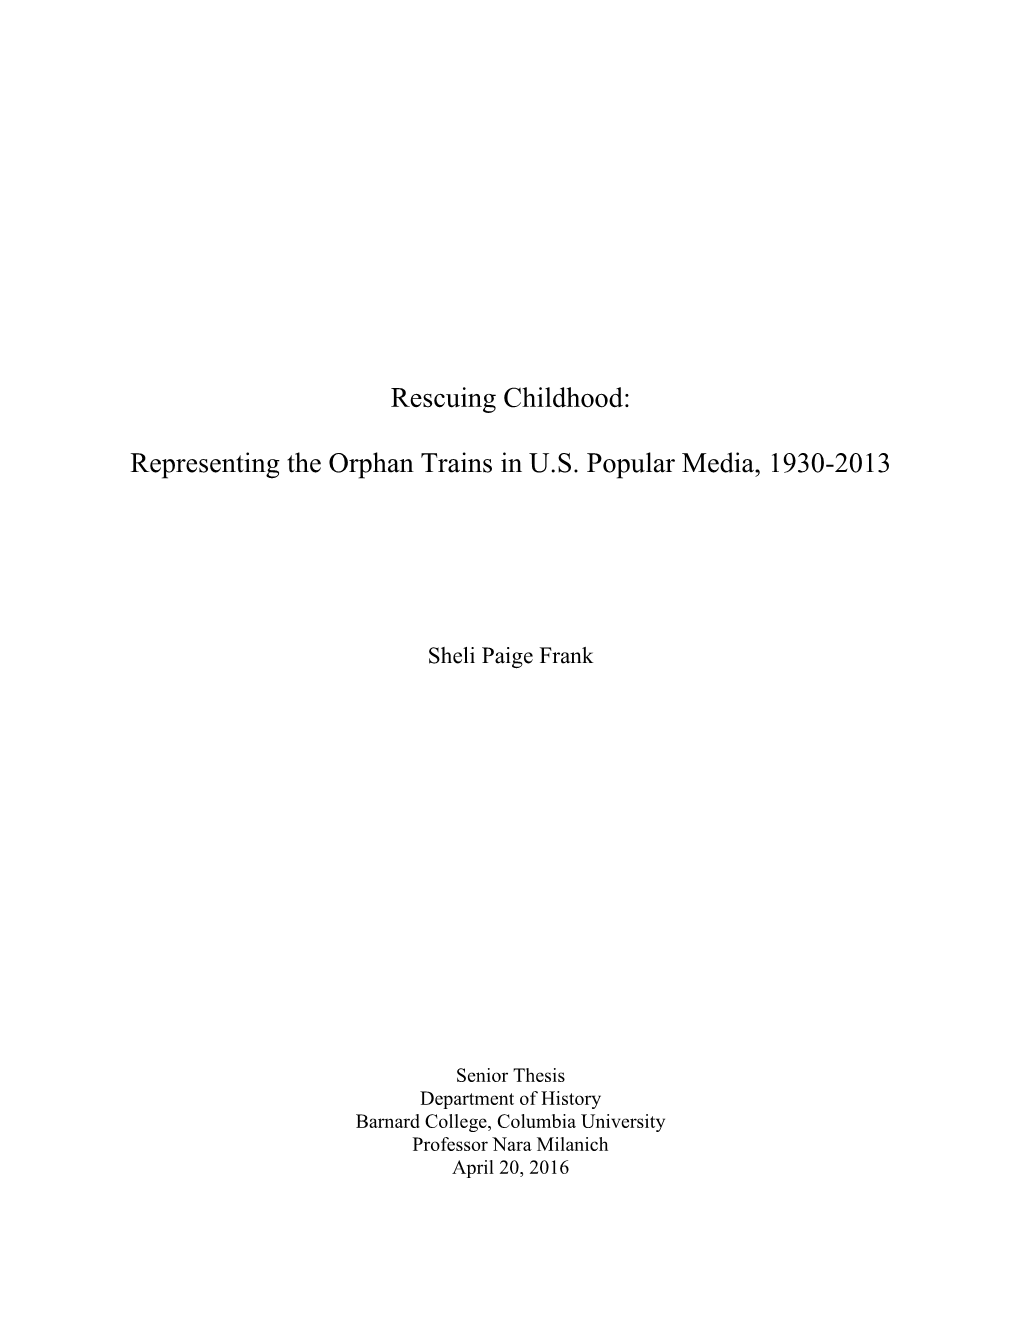 Rescuing Childhood: Representing the Orphan Trains